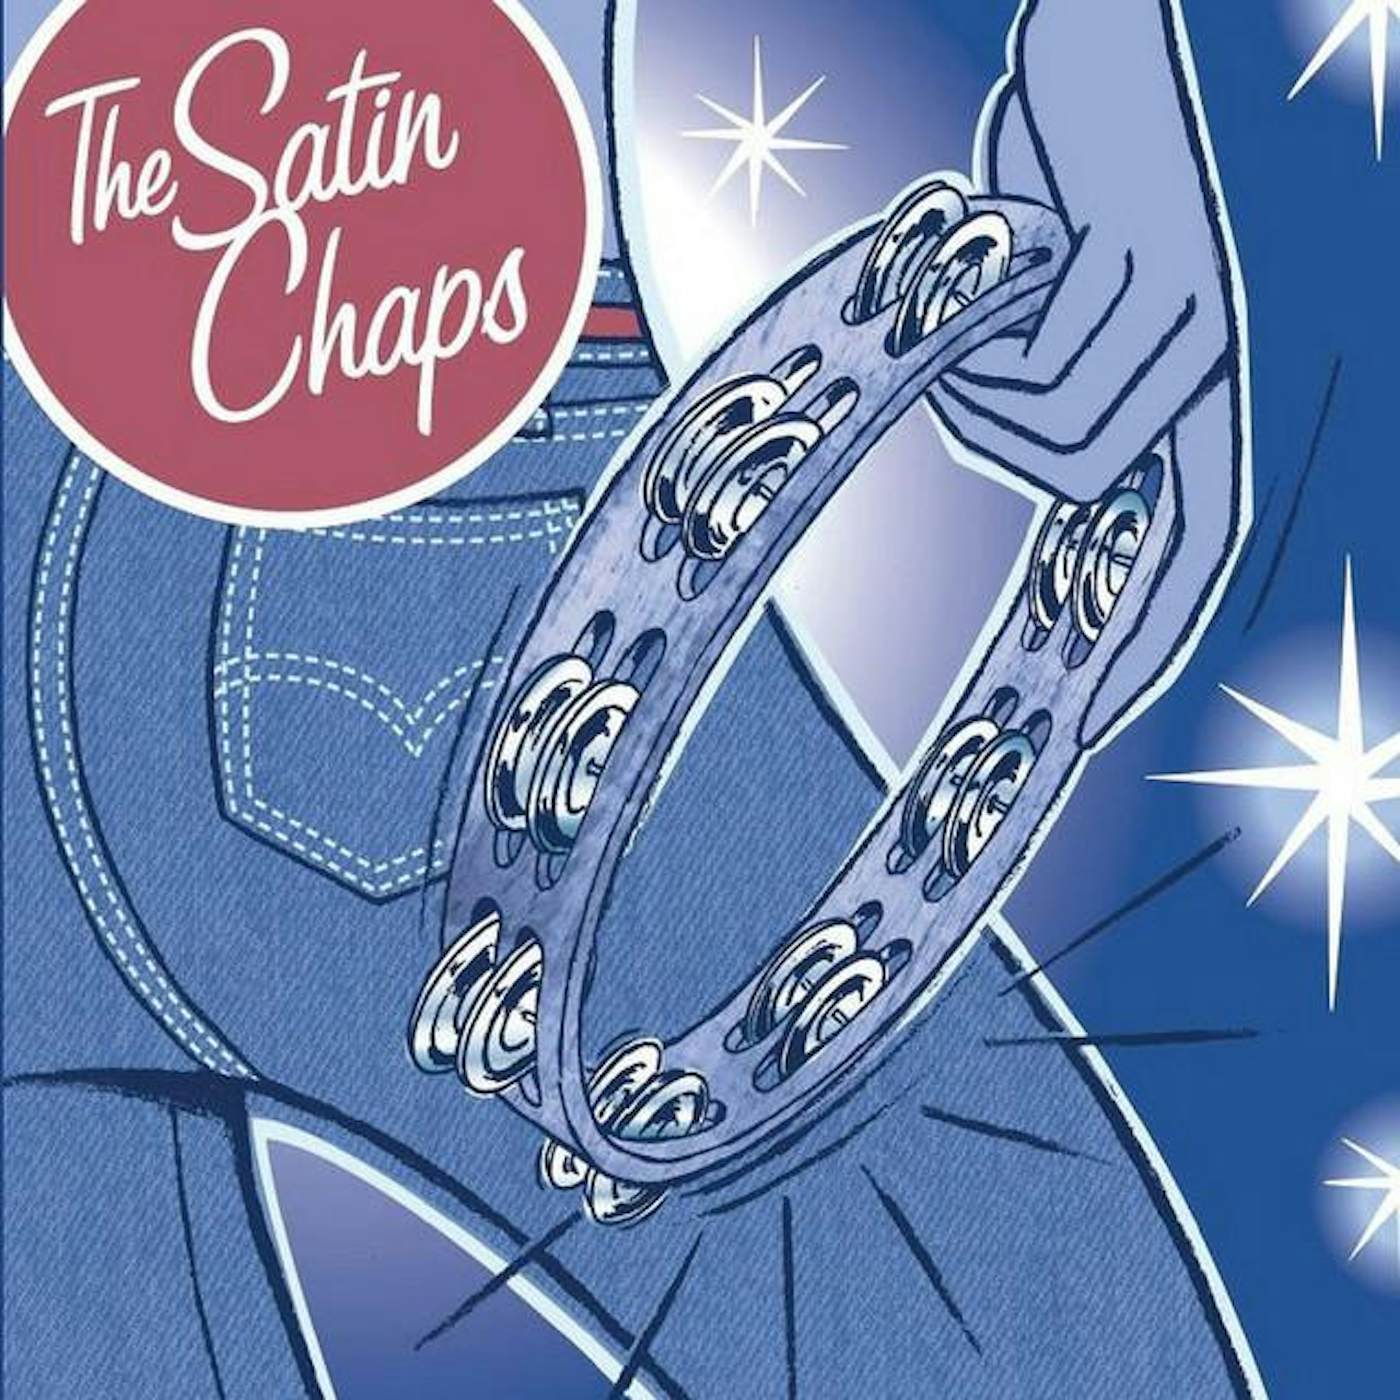 The Satin Chaps